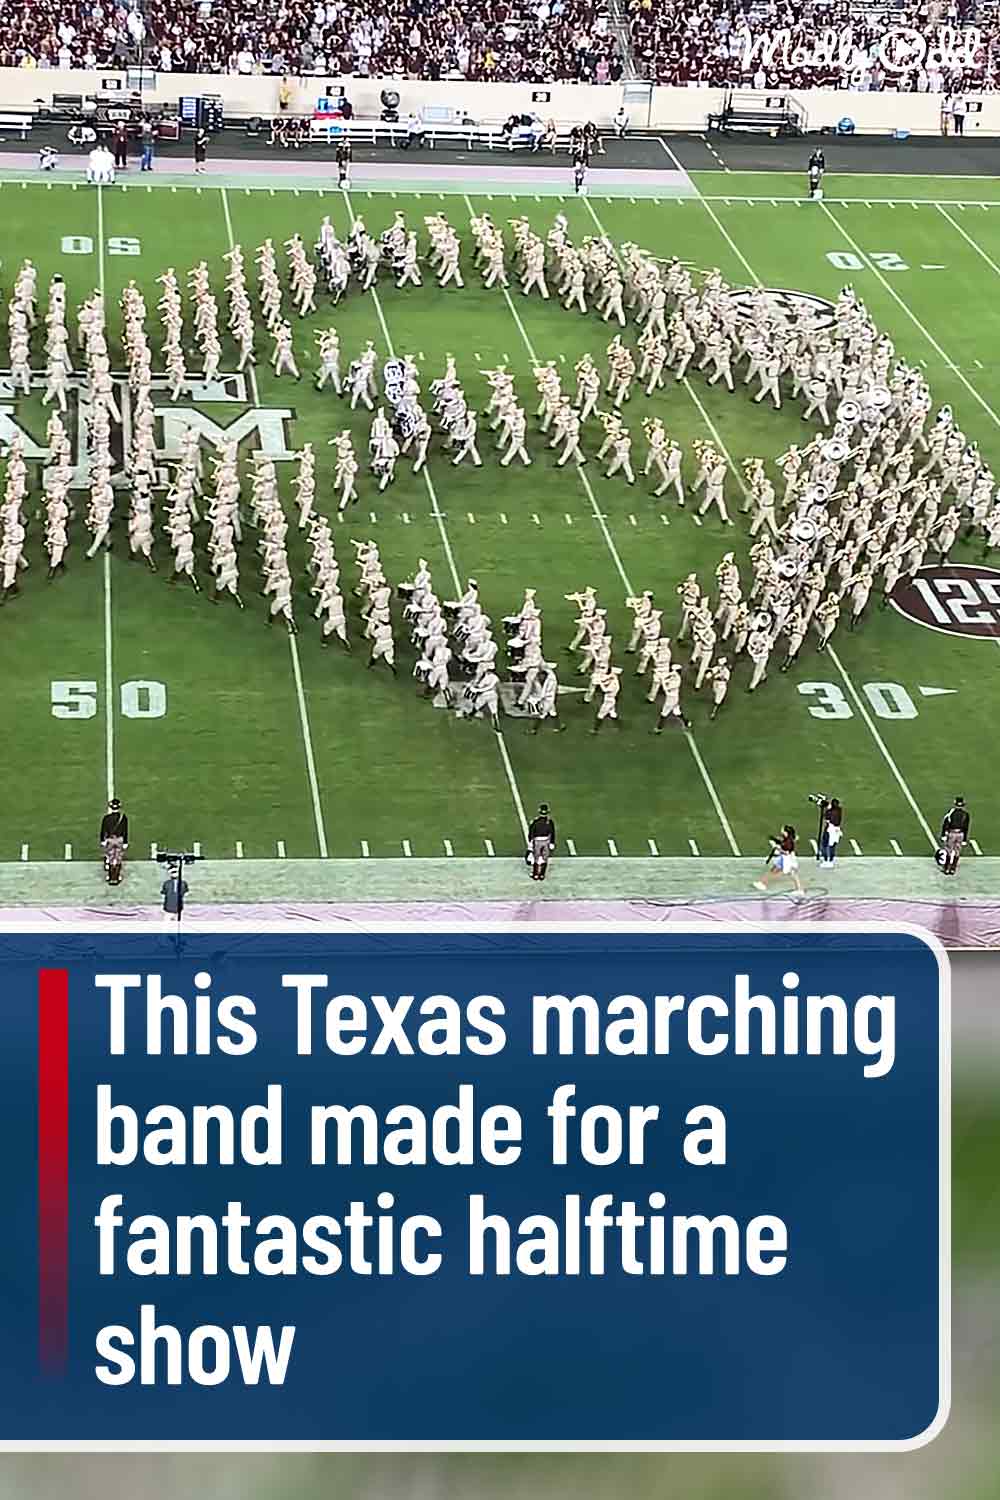 This Texas marching band made for a fantastic halftime show